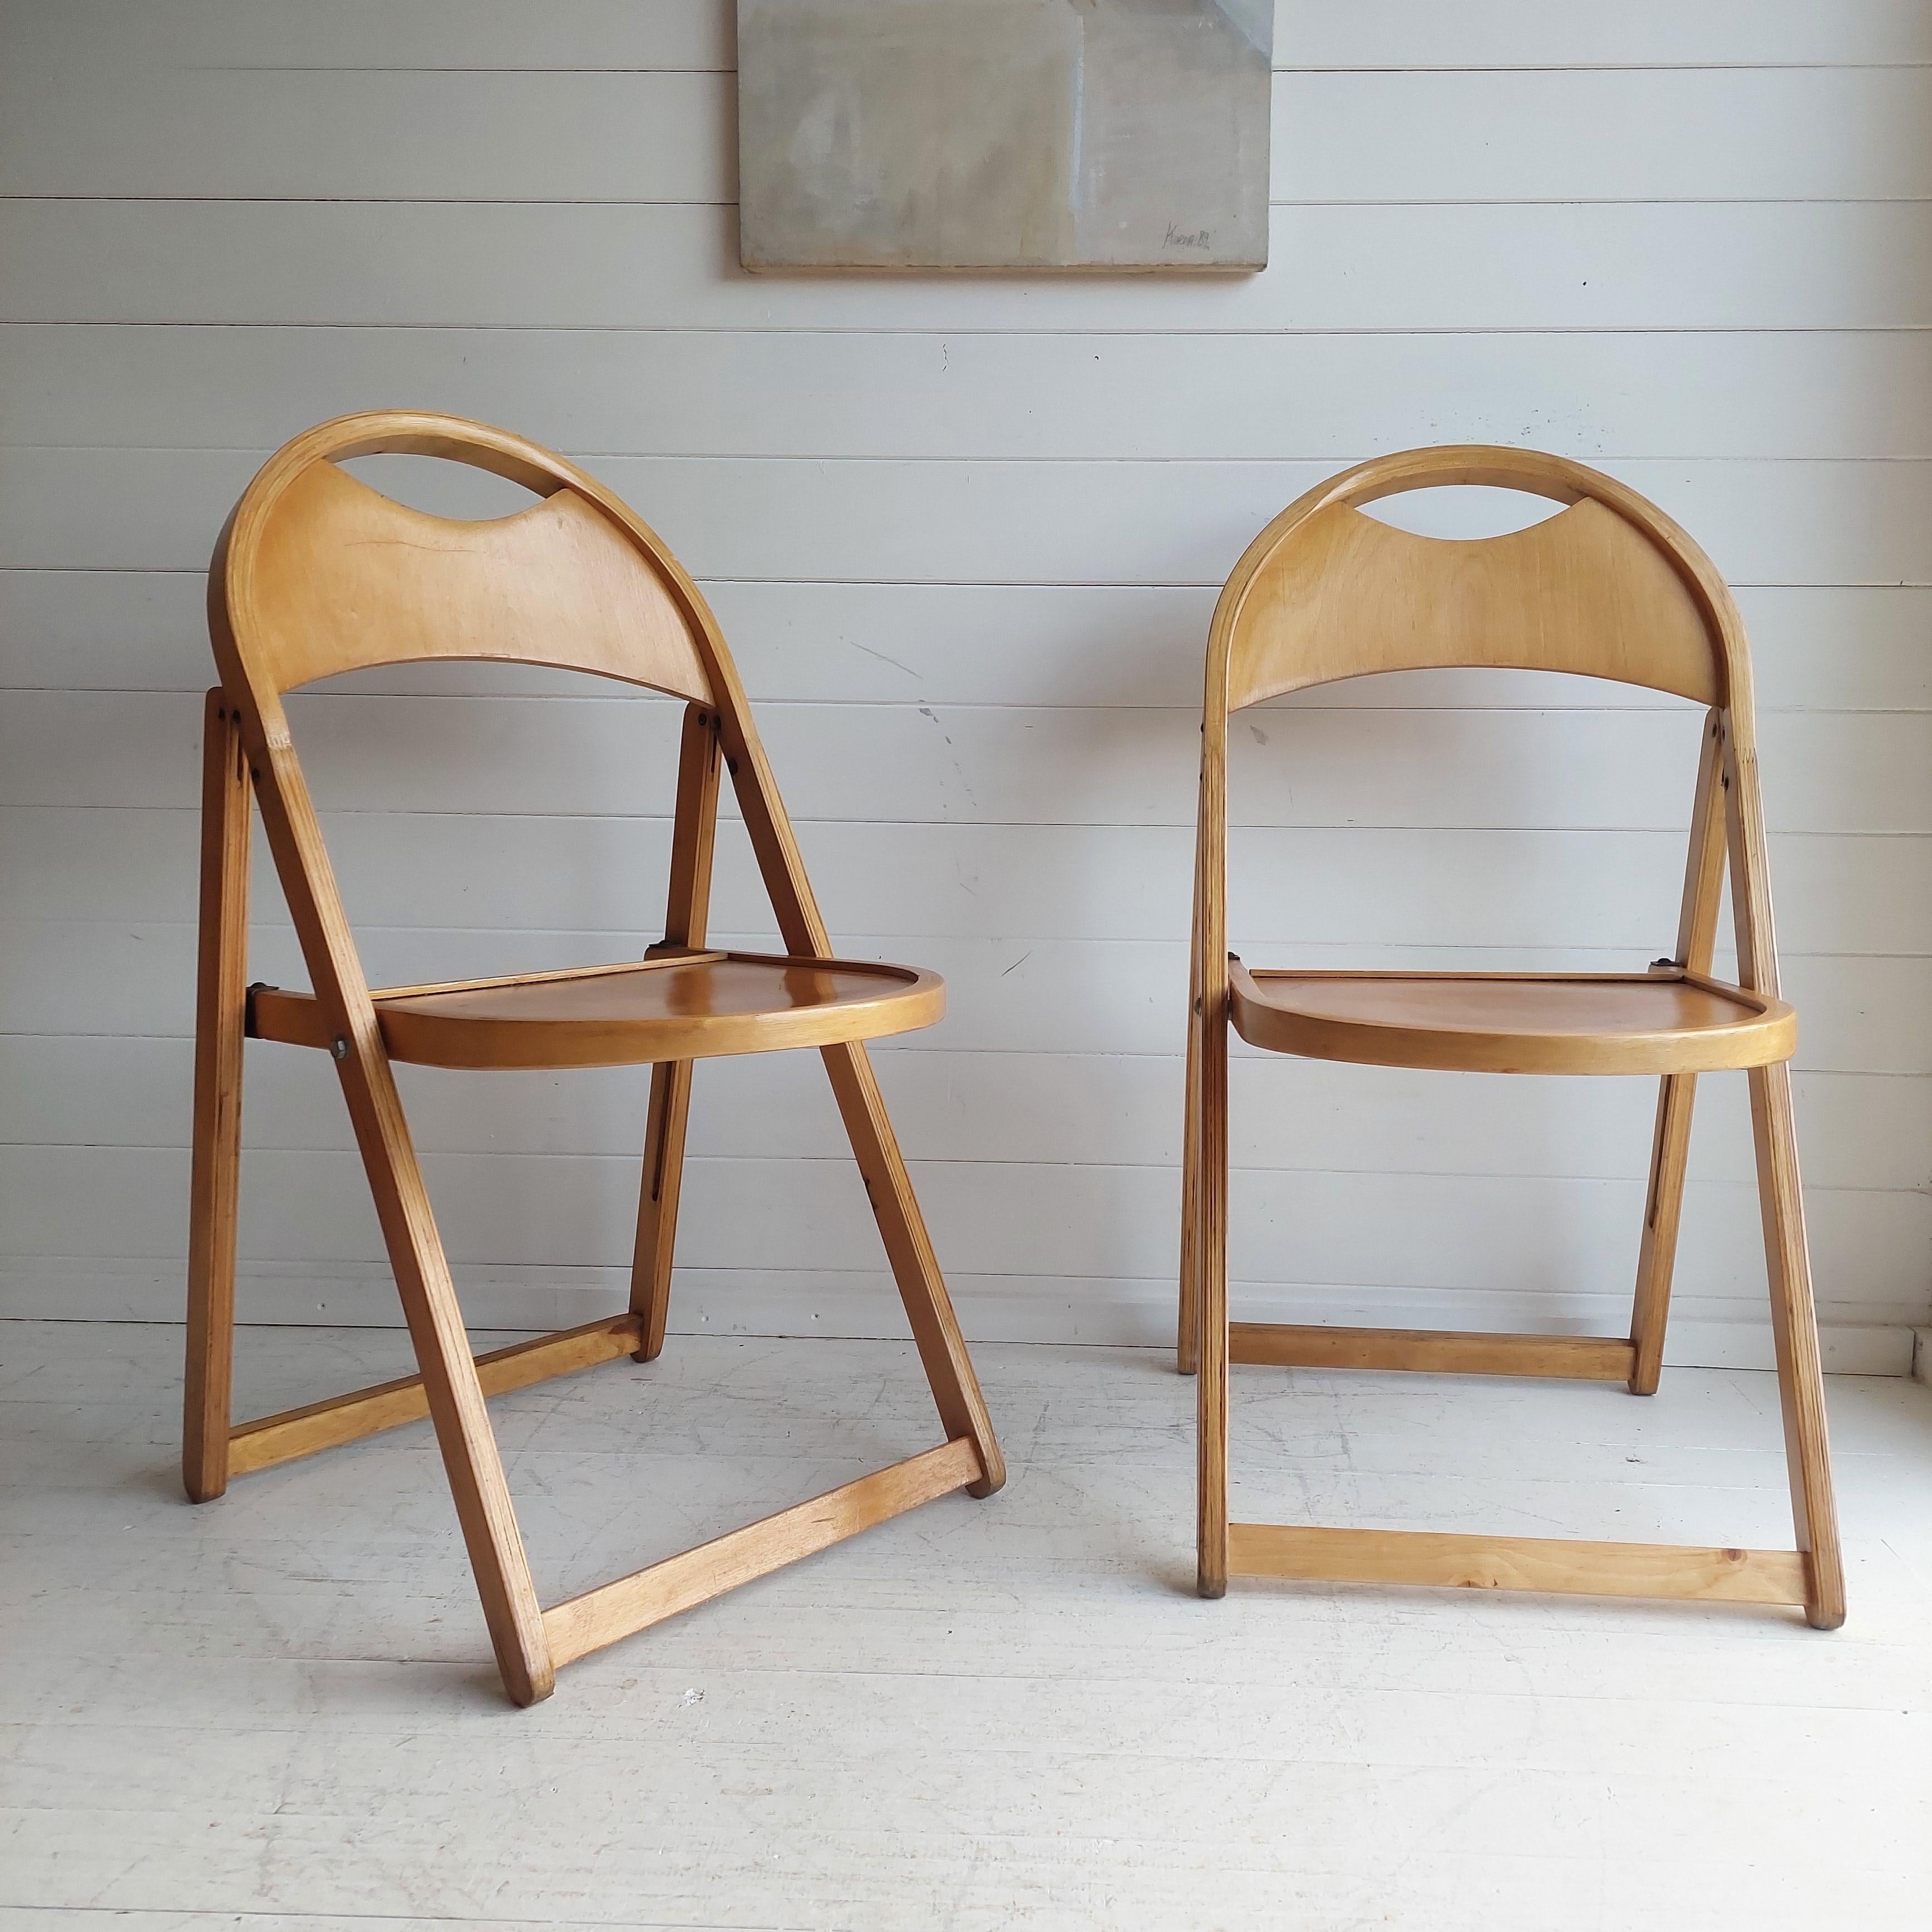 1950s folding chair for OTK set/2. Good condition consistent with age and use.
Mid-Century folding chairs.
Designer: Michael Thonet
Model: B-751
Stamped with quality control OTK 23

Old bistro French chairs OTK 1950
Beech curved